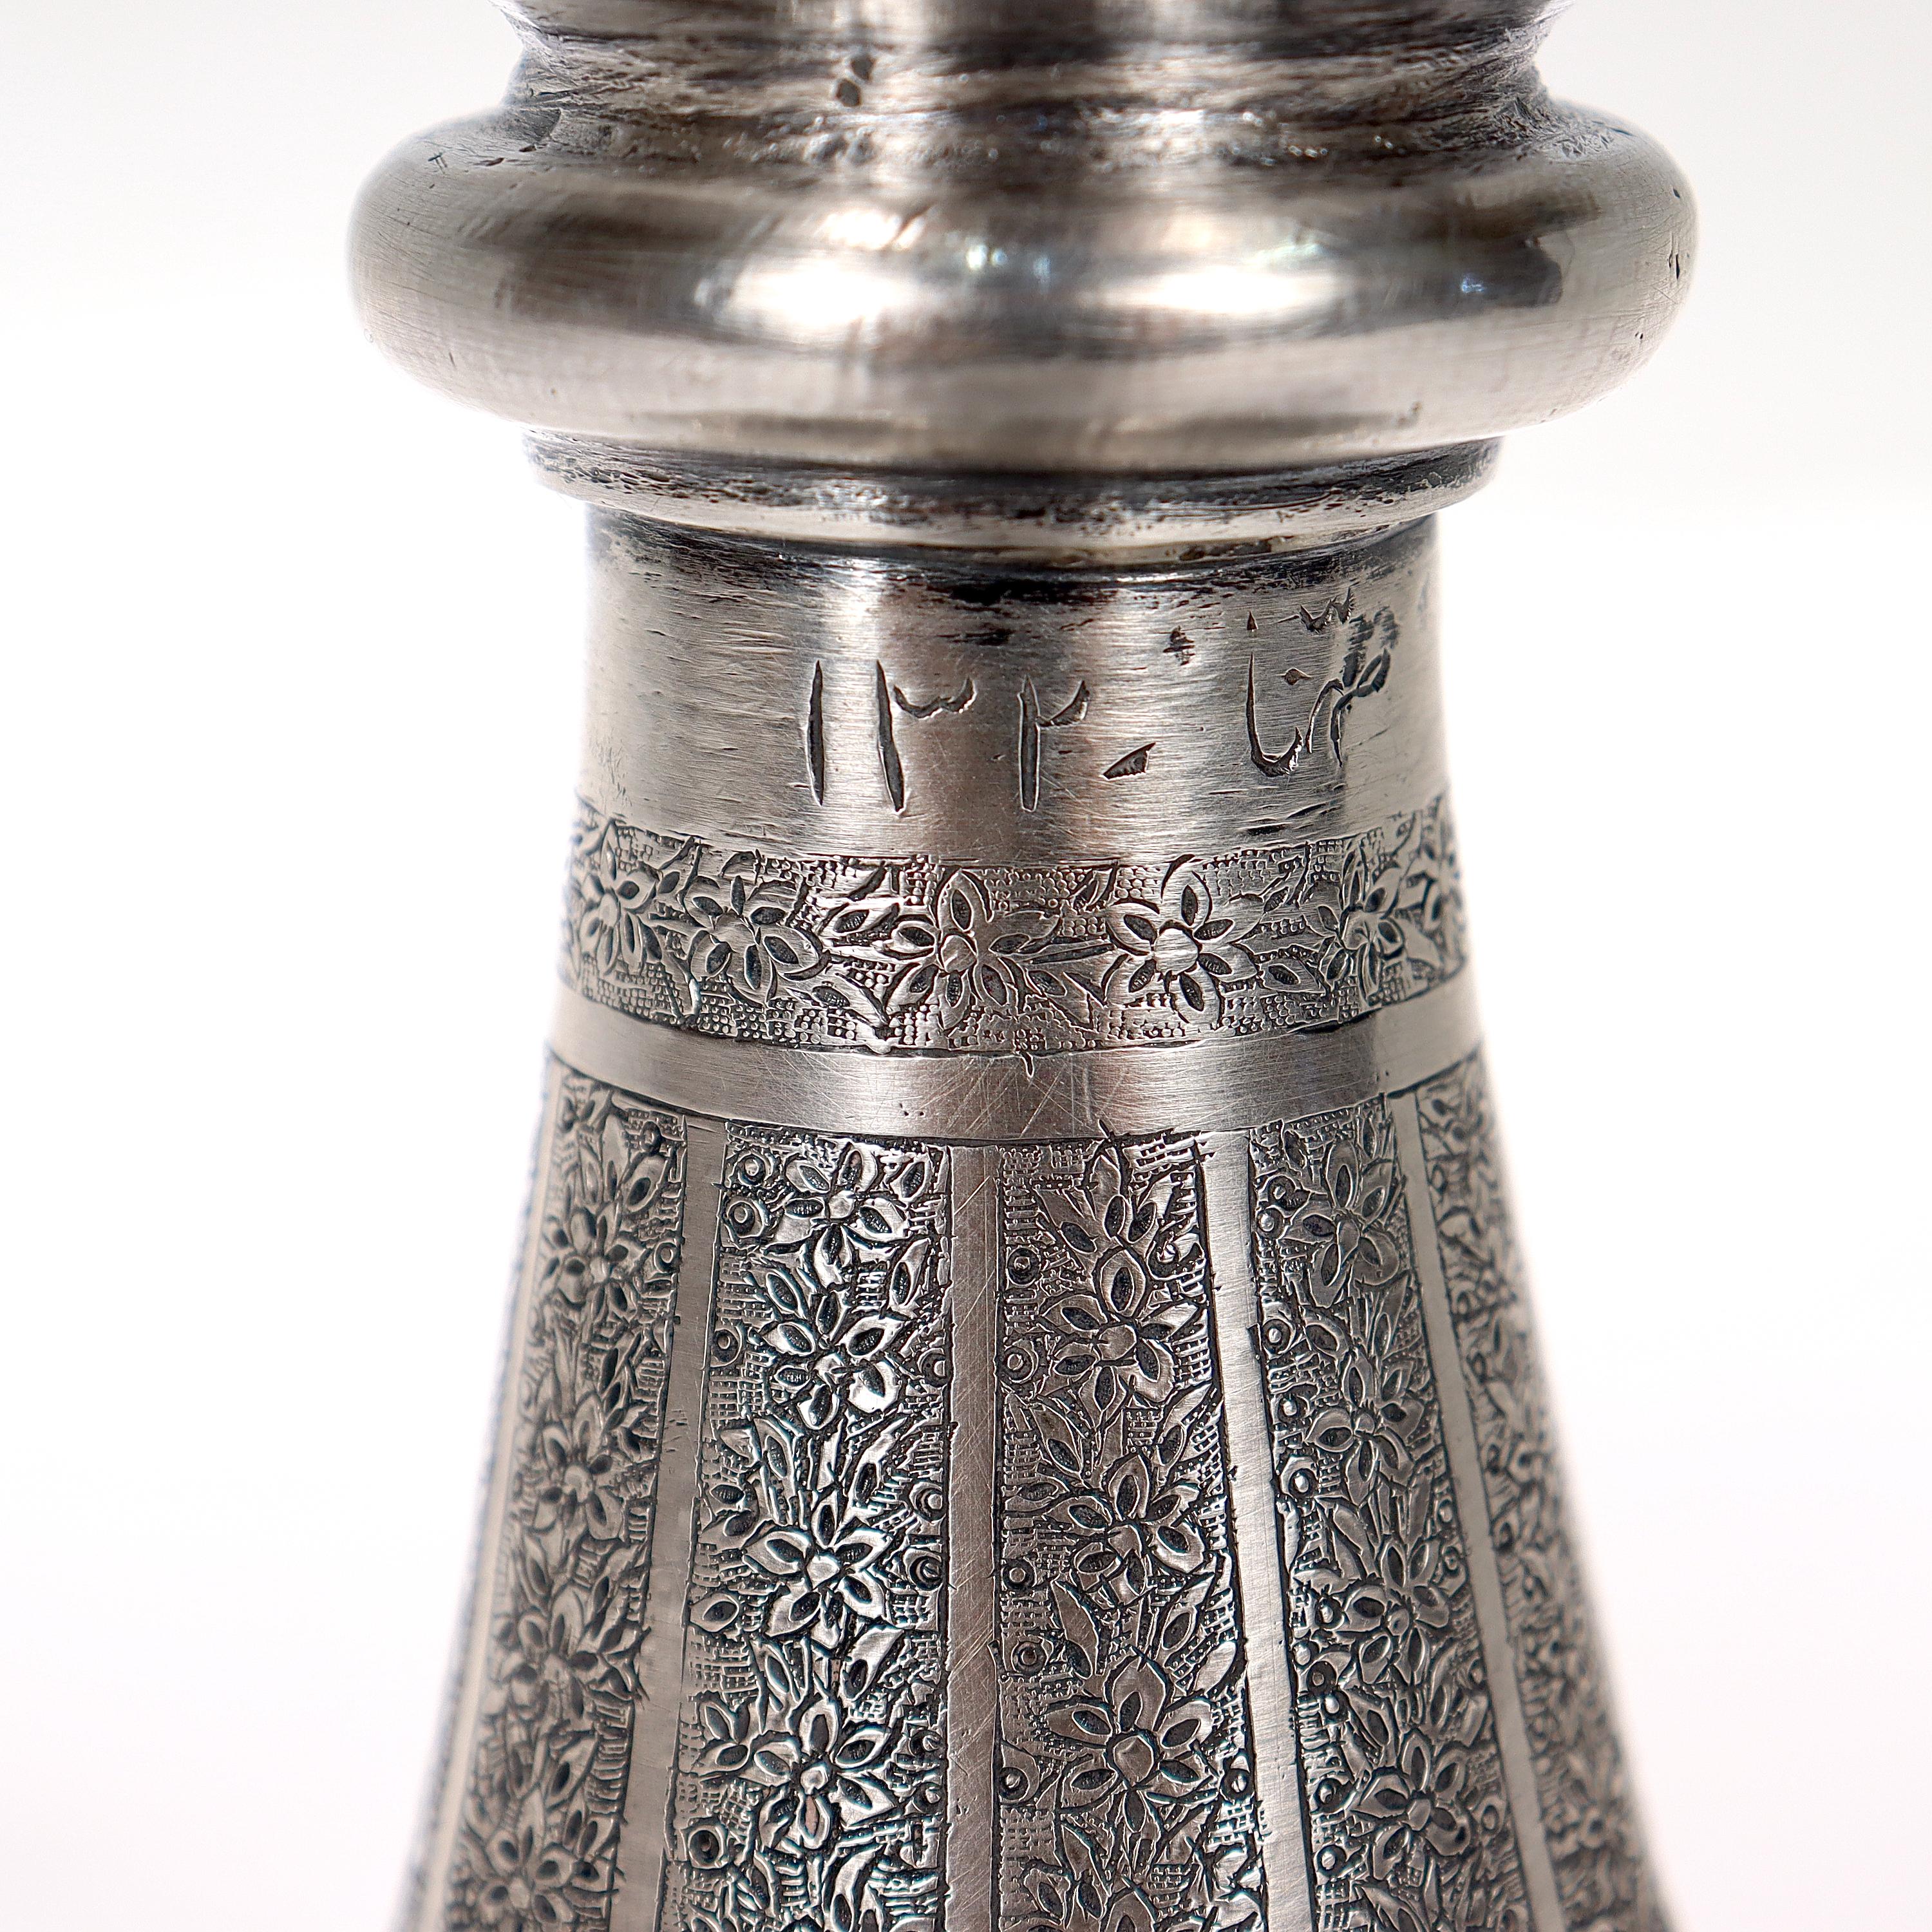 Large Twin-Handled Old or Antique Islamic Ottoman / Persian Repoussé Silver Vase For Sale 8